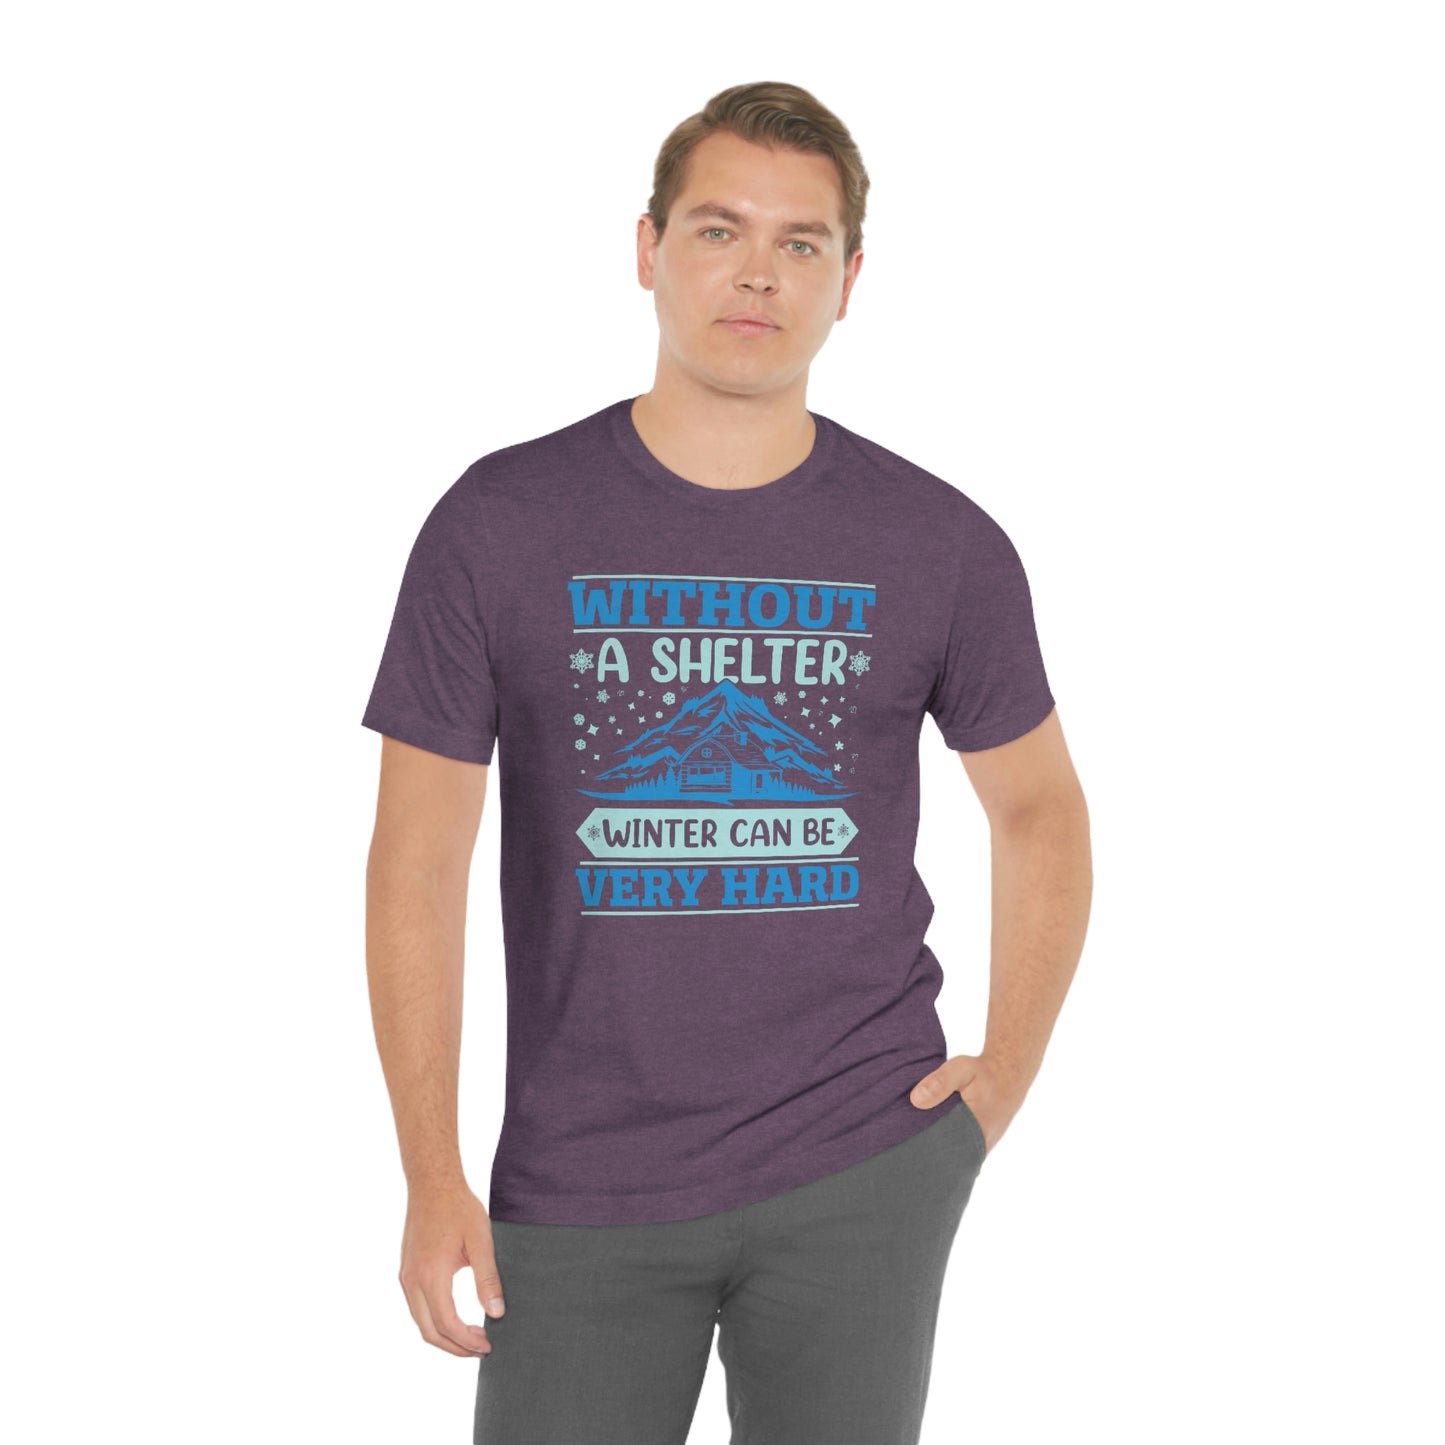 Without a Shelter Winter Can Be Very Hard  Unisex Jersey Short Sleeve Tee